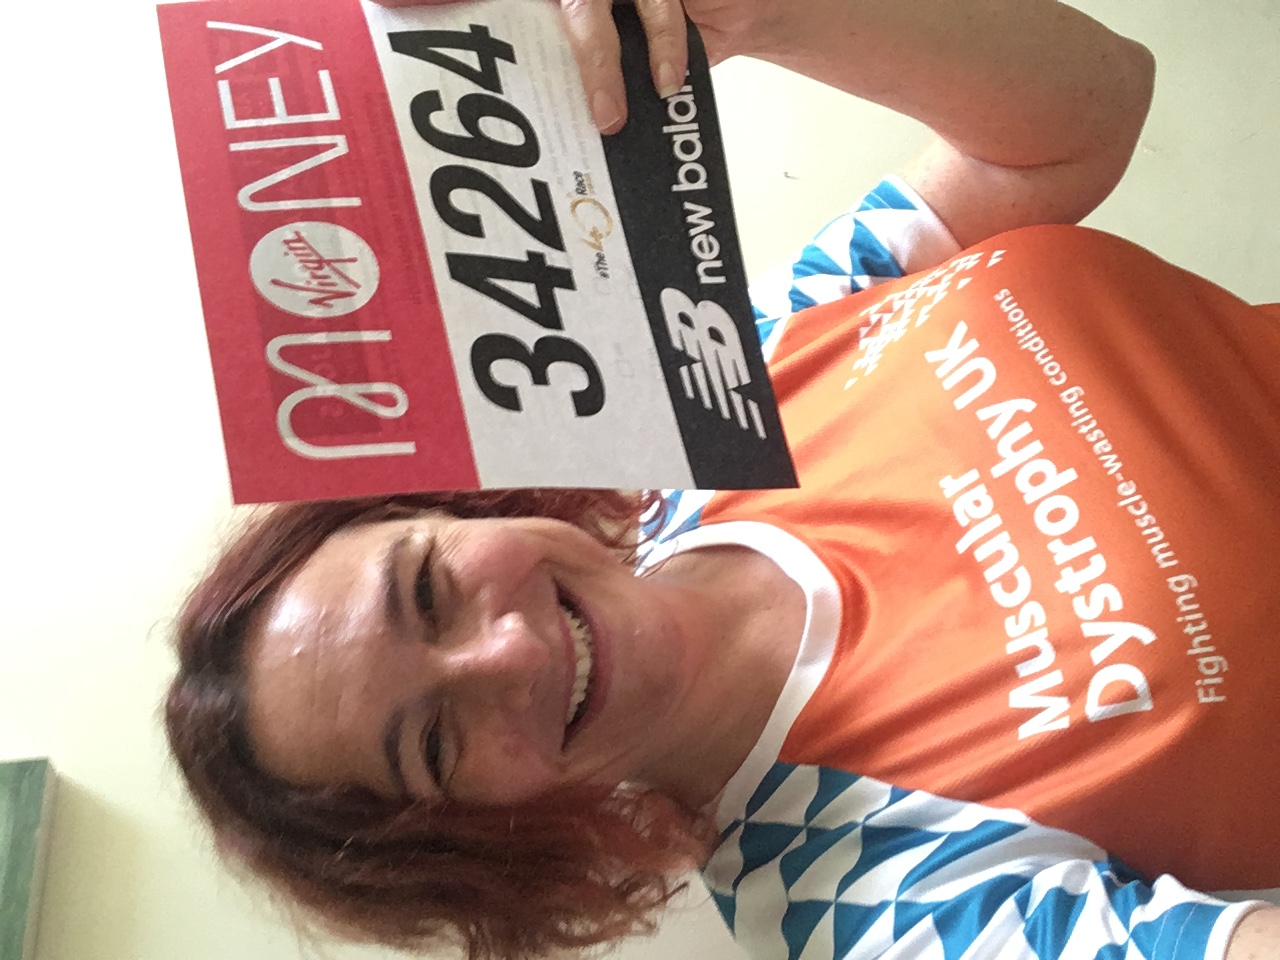 Catherine Woodhead, chief executive of Muscular Dystrophy UK, who is running the 2020 Virgin Money London Marathon to raise money for the charity (Muscular Dystrophy UK/PA)